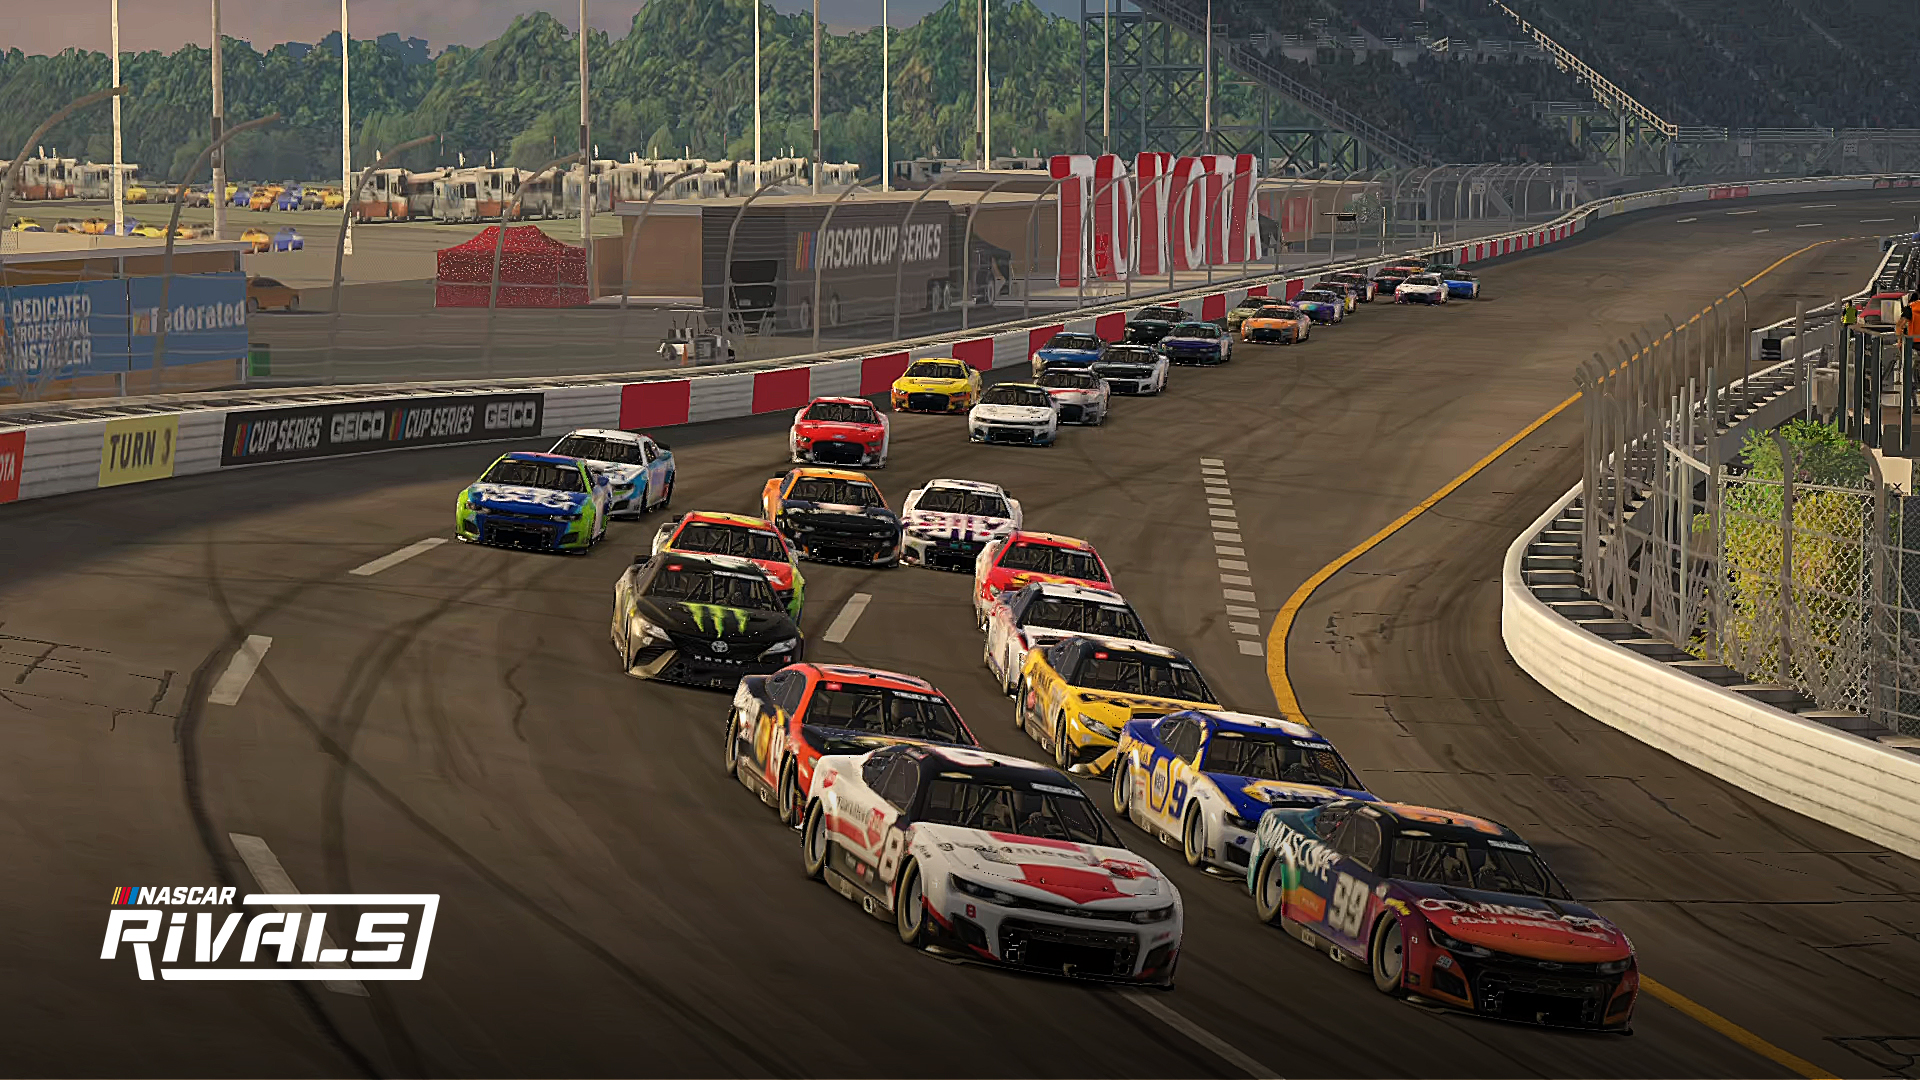 Motorsport Games Takes on Next Gen With NASCAR Rivals Heavy